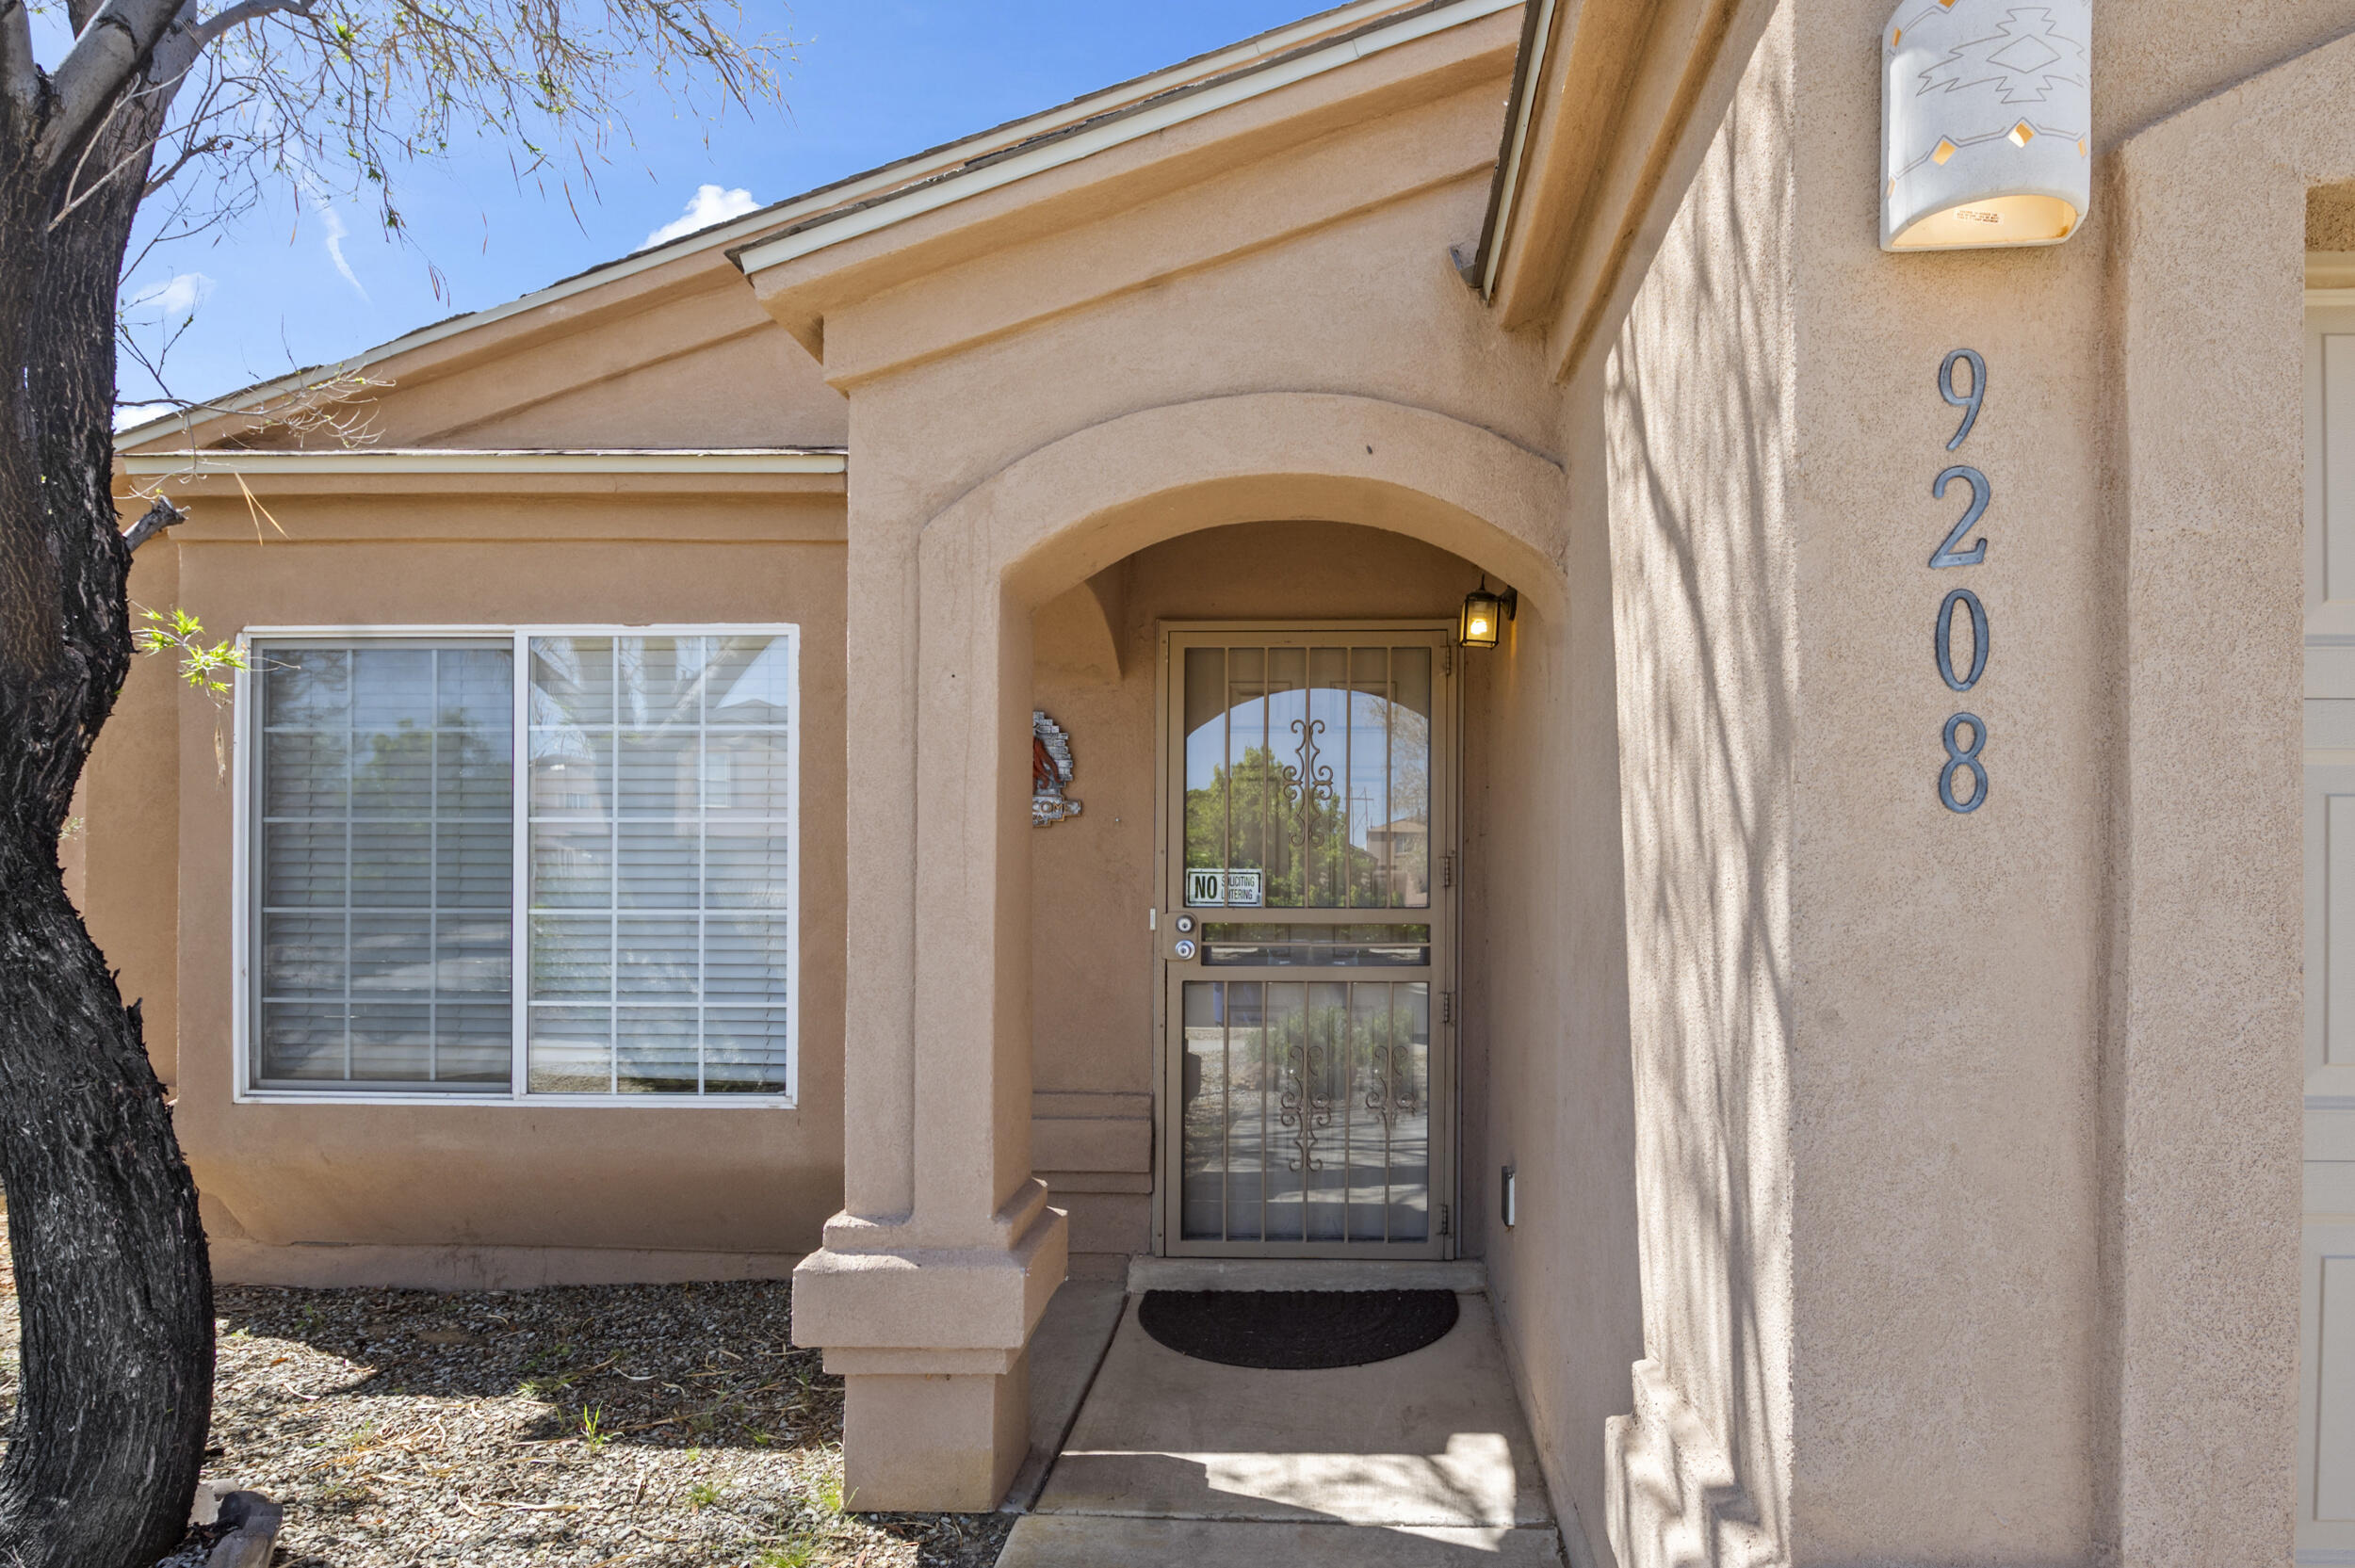 9208 Valle Vidal Place SW, Albuquerque, New Mexico 87121, 3 Bedrooms Bedrooms, ,2 BathroomsBathrooms,Residential,For Sale,9208 Valle Vidal Place SW,1061526